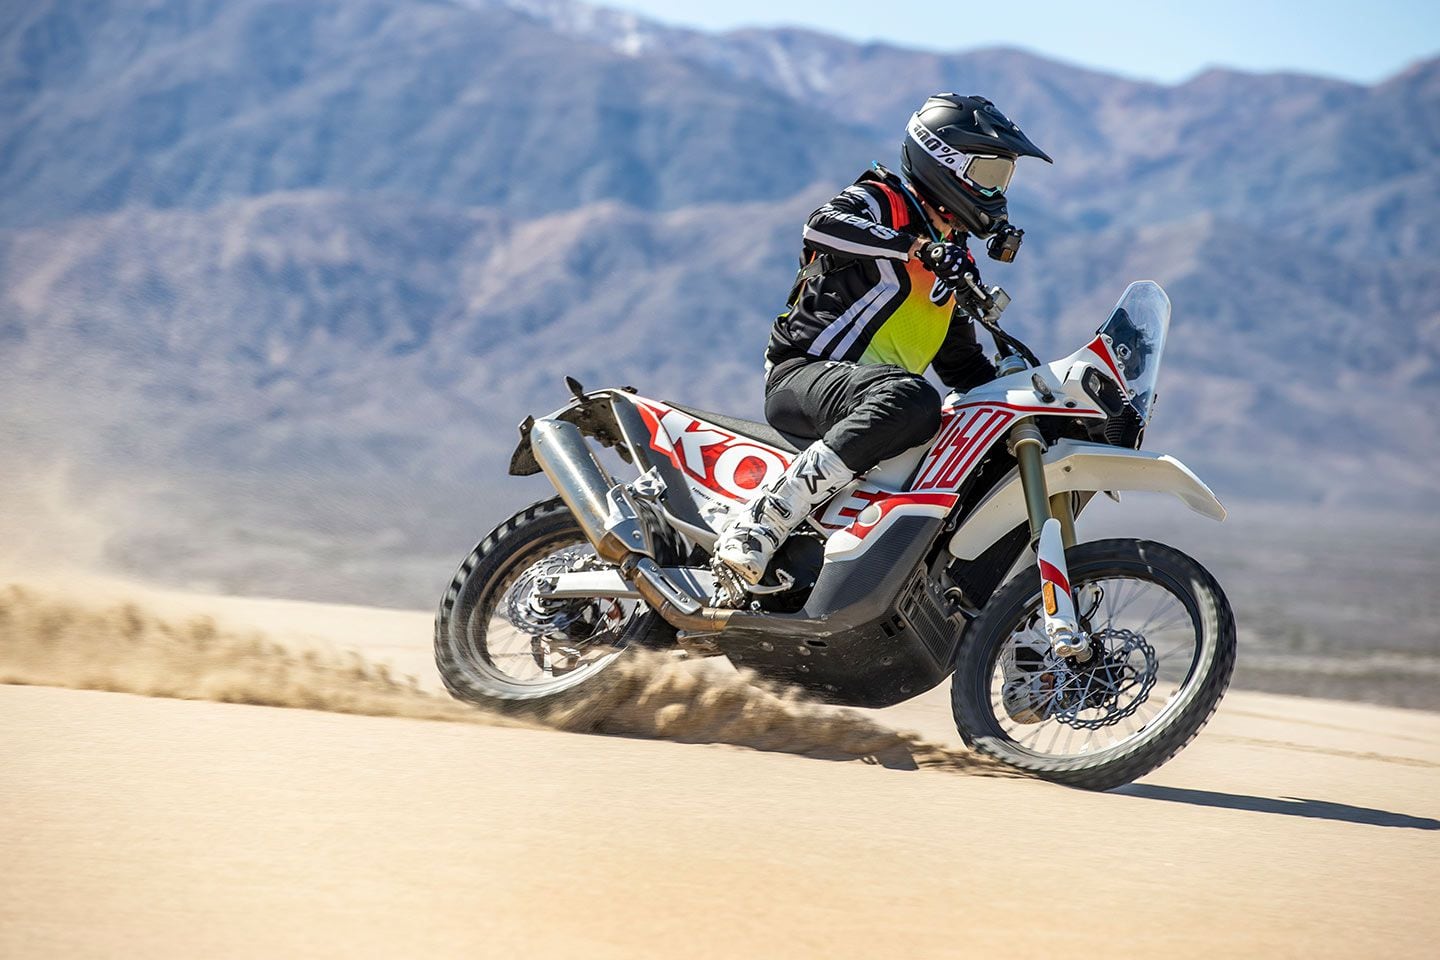 You’d be surprised at how nimble this 368-pound rally bike is. It offers neutral handling and is easy to get up to speed quickly.